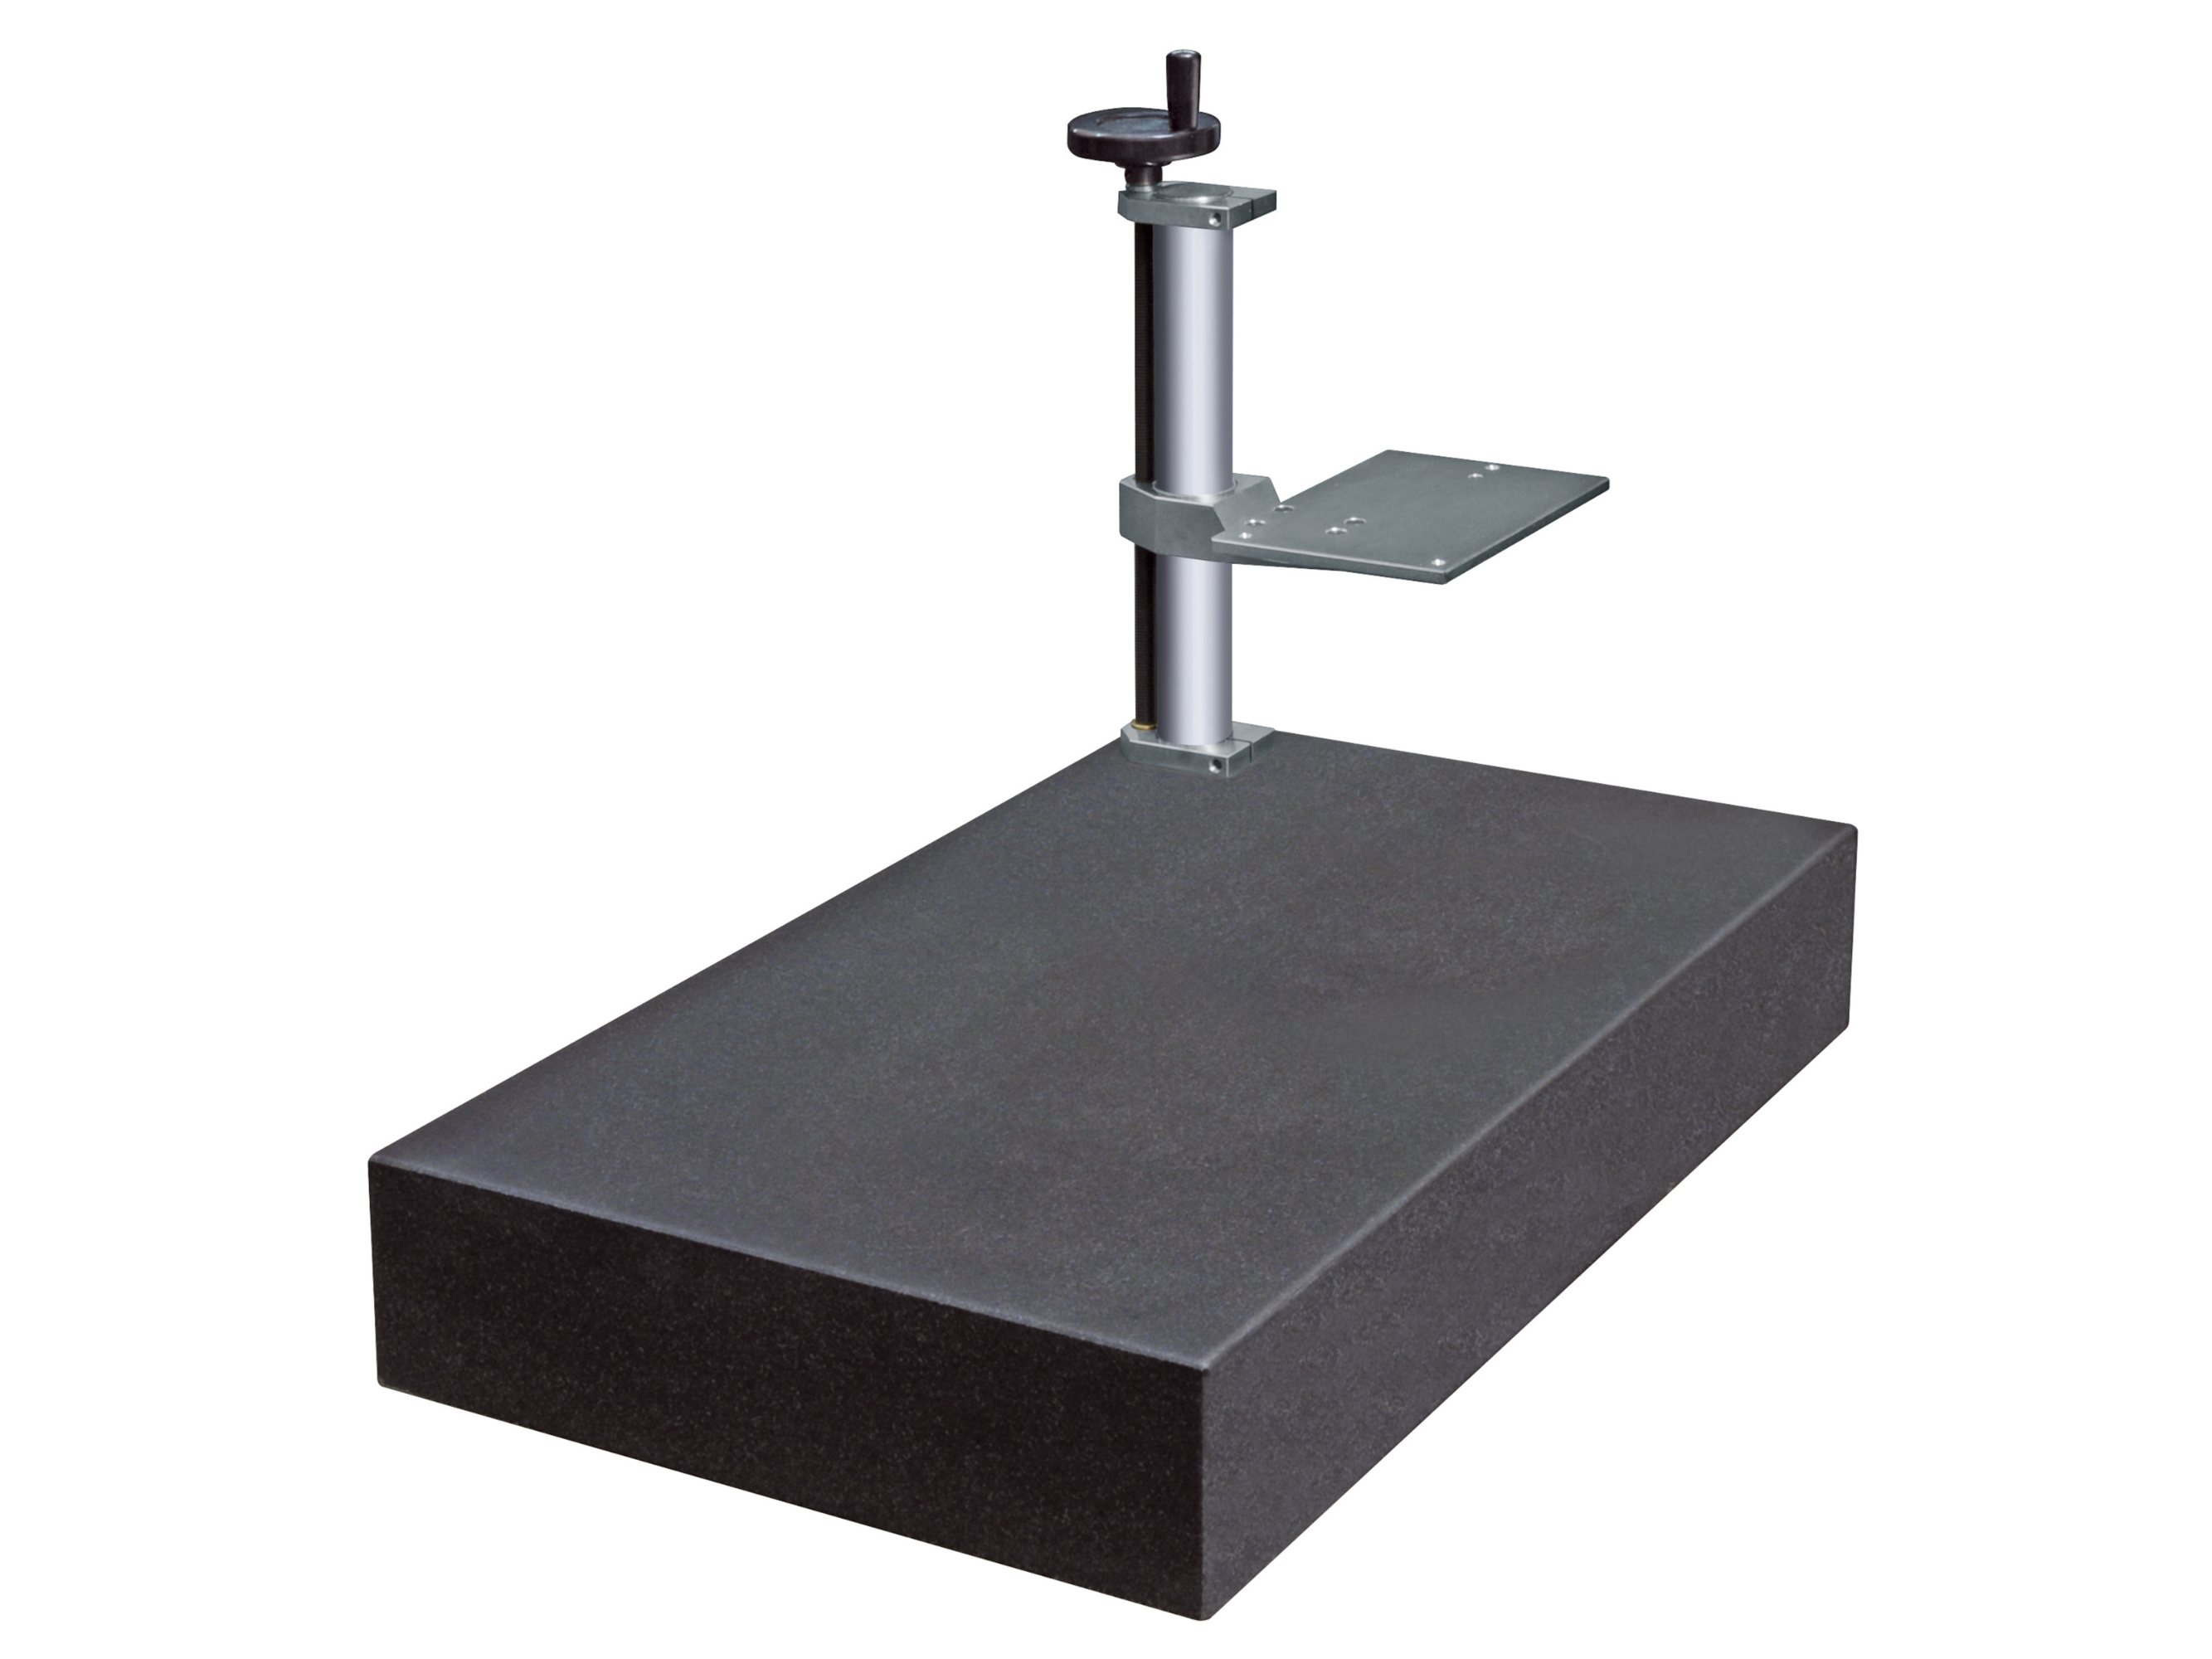 Tesa Rugosurf 20 Support with granite table, 630 x 400 mm 06960035